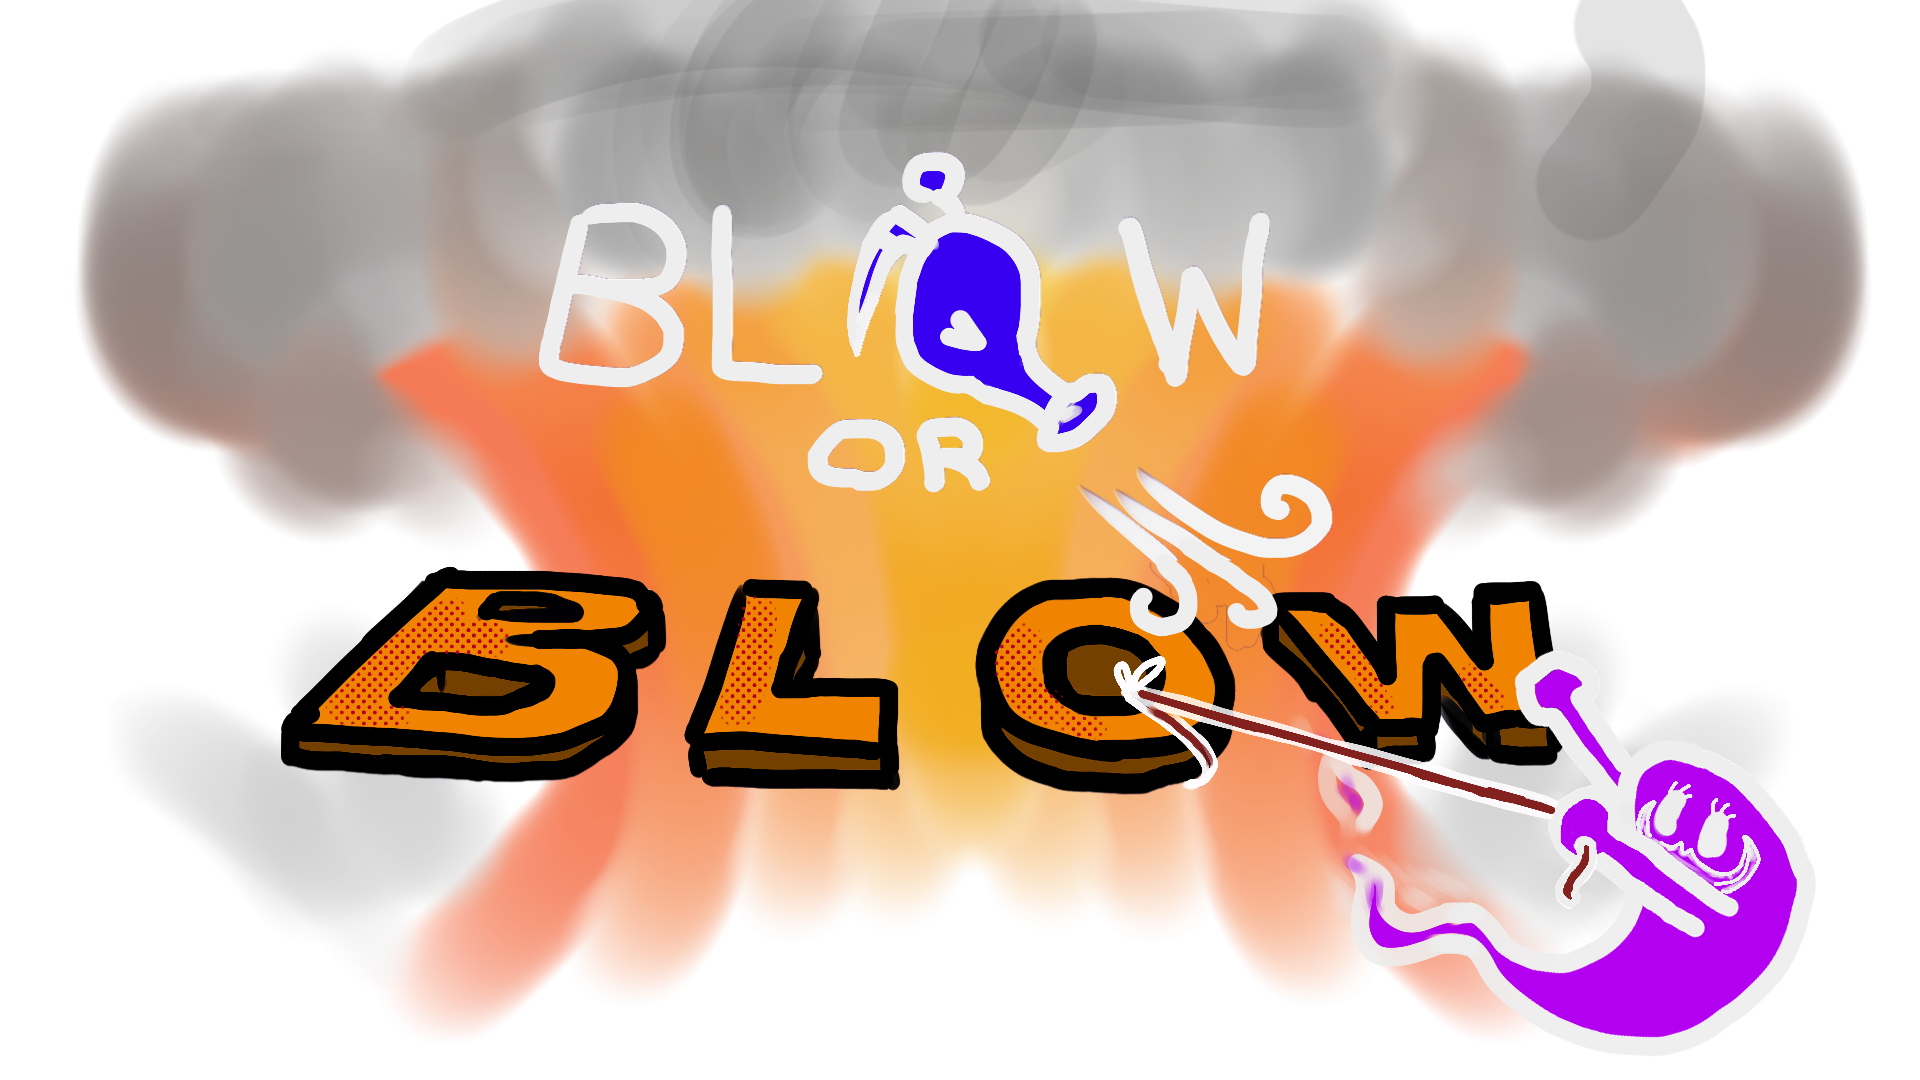 Blow or Blow